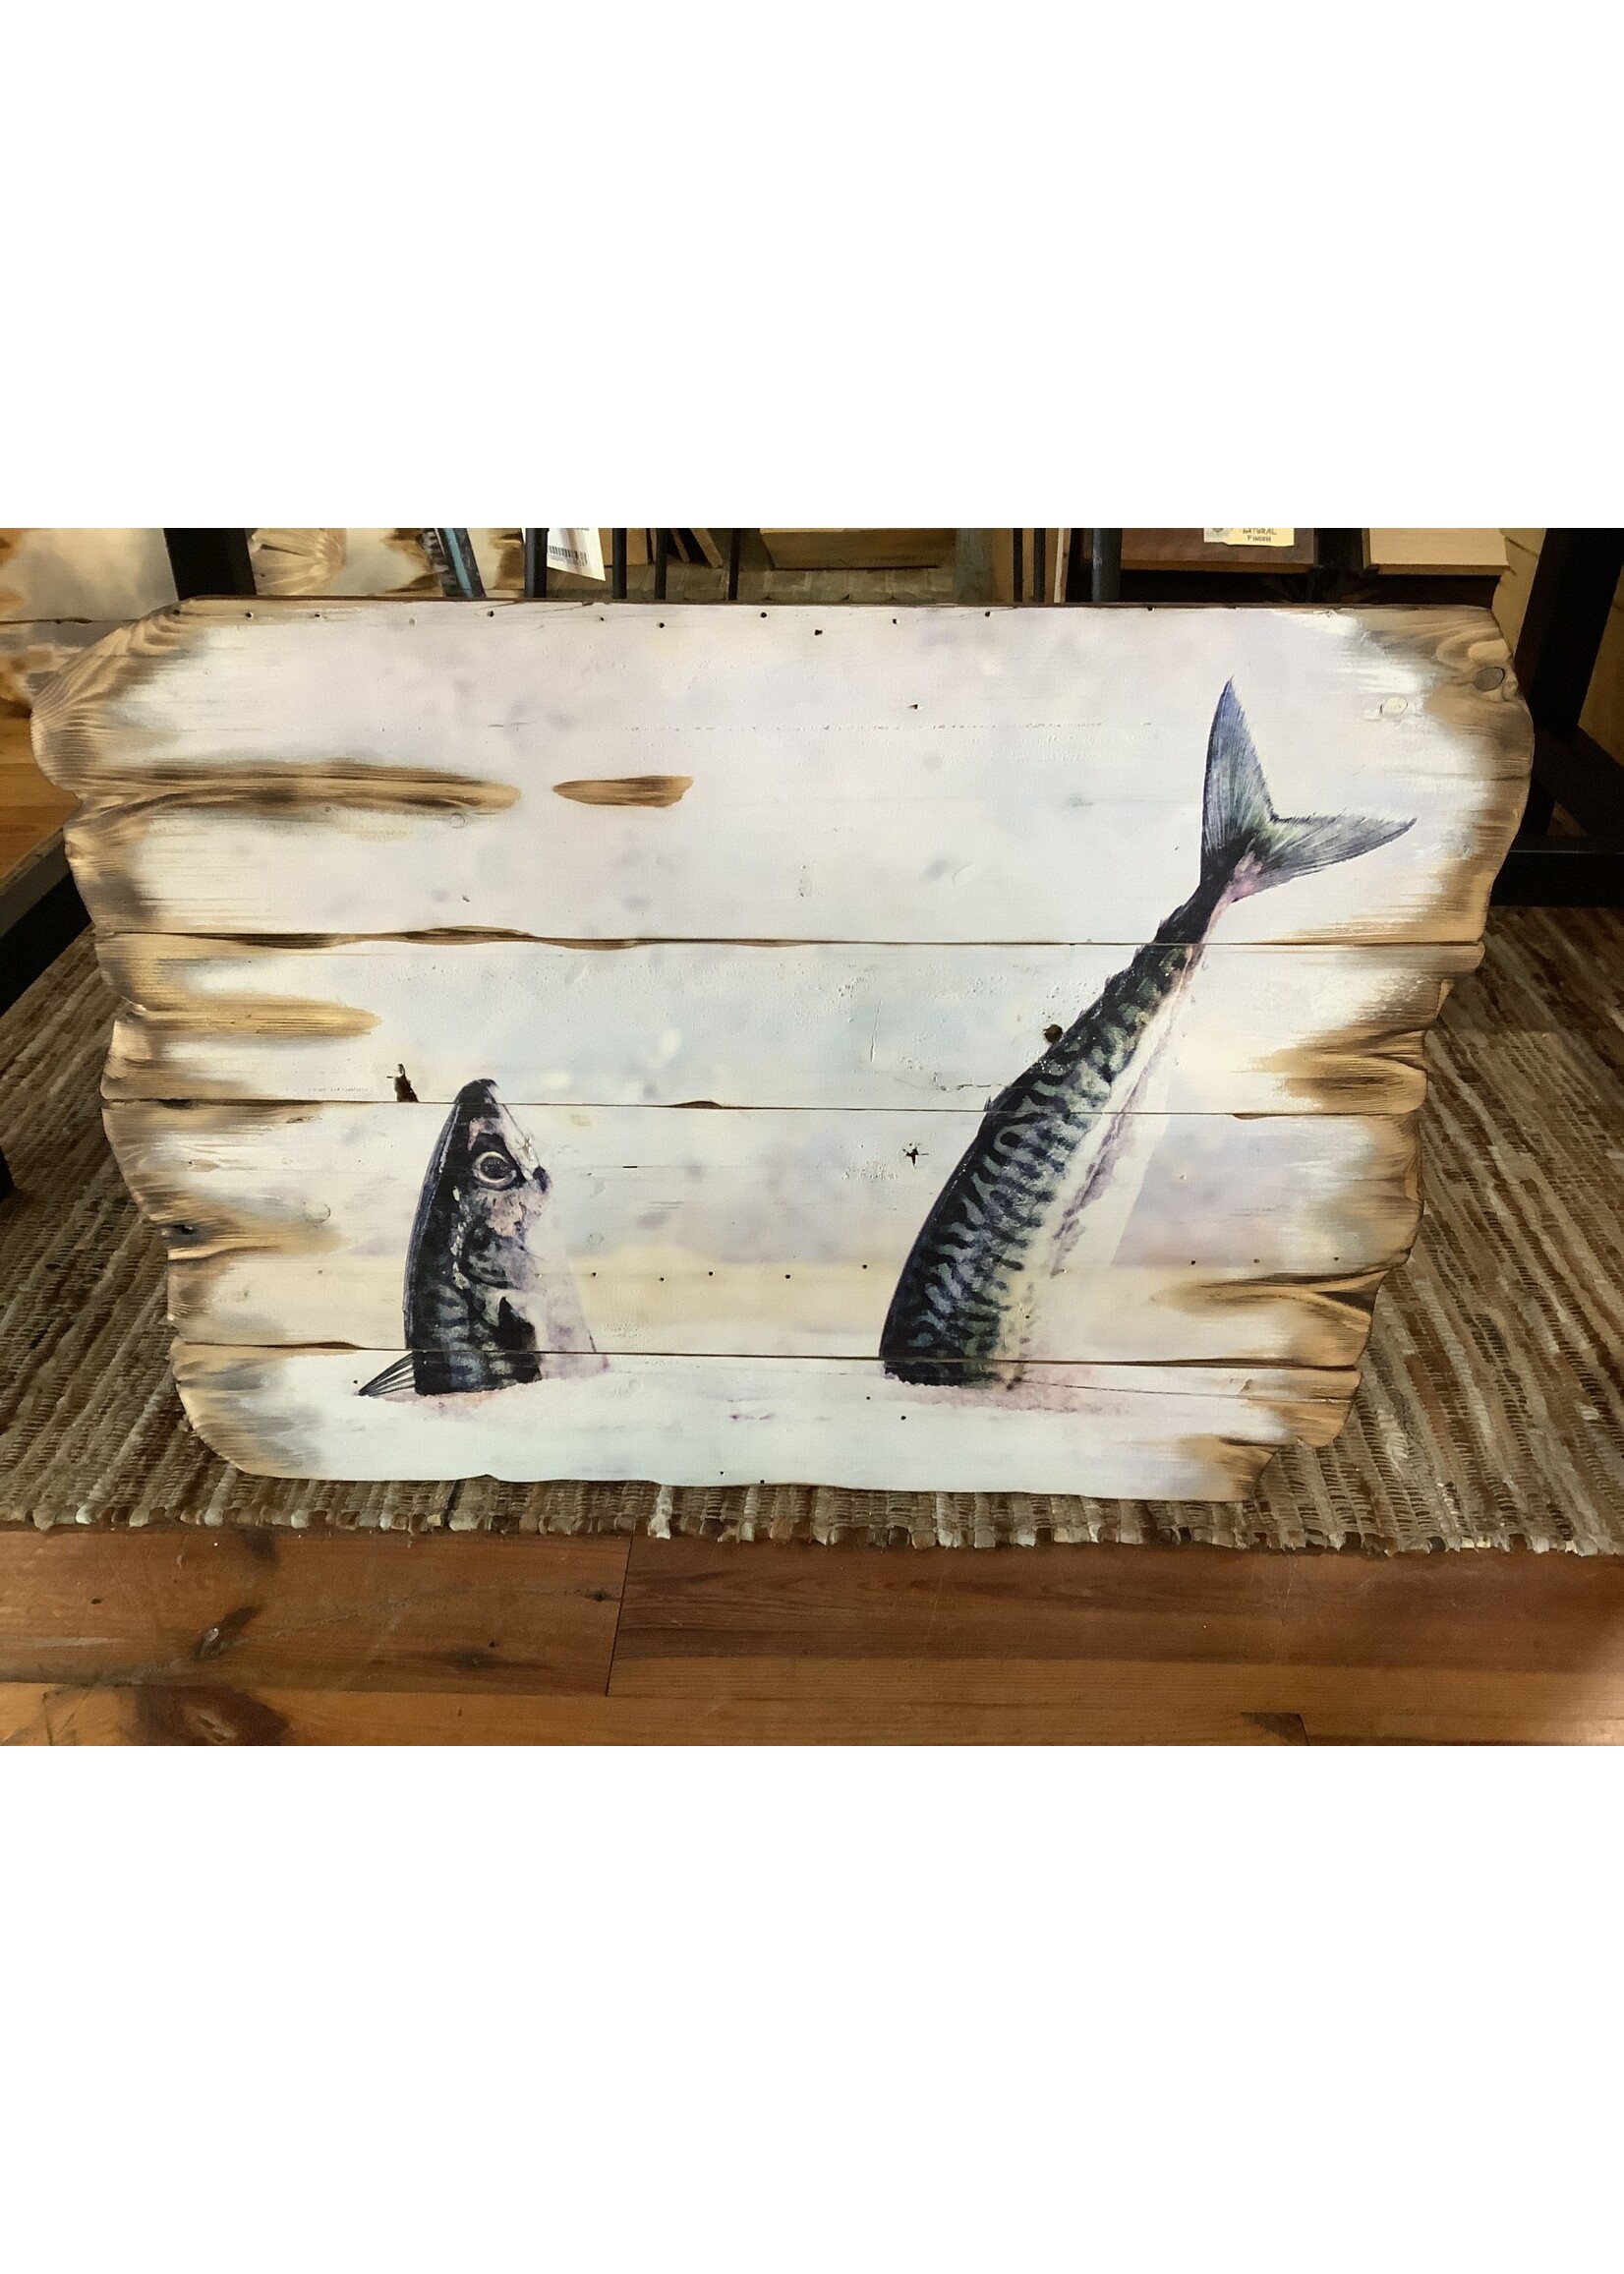 Old Wood Delaware OW Jumping Fish - Burned Plank Art 36x24